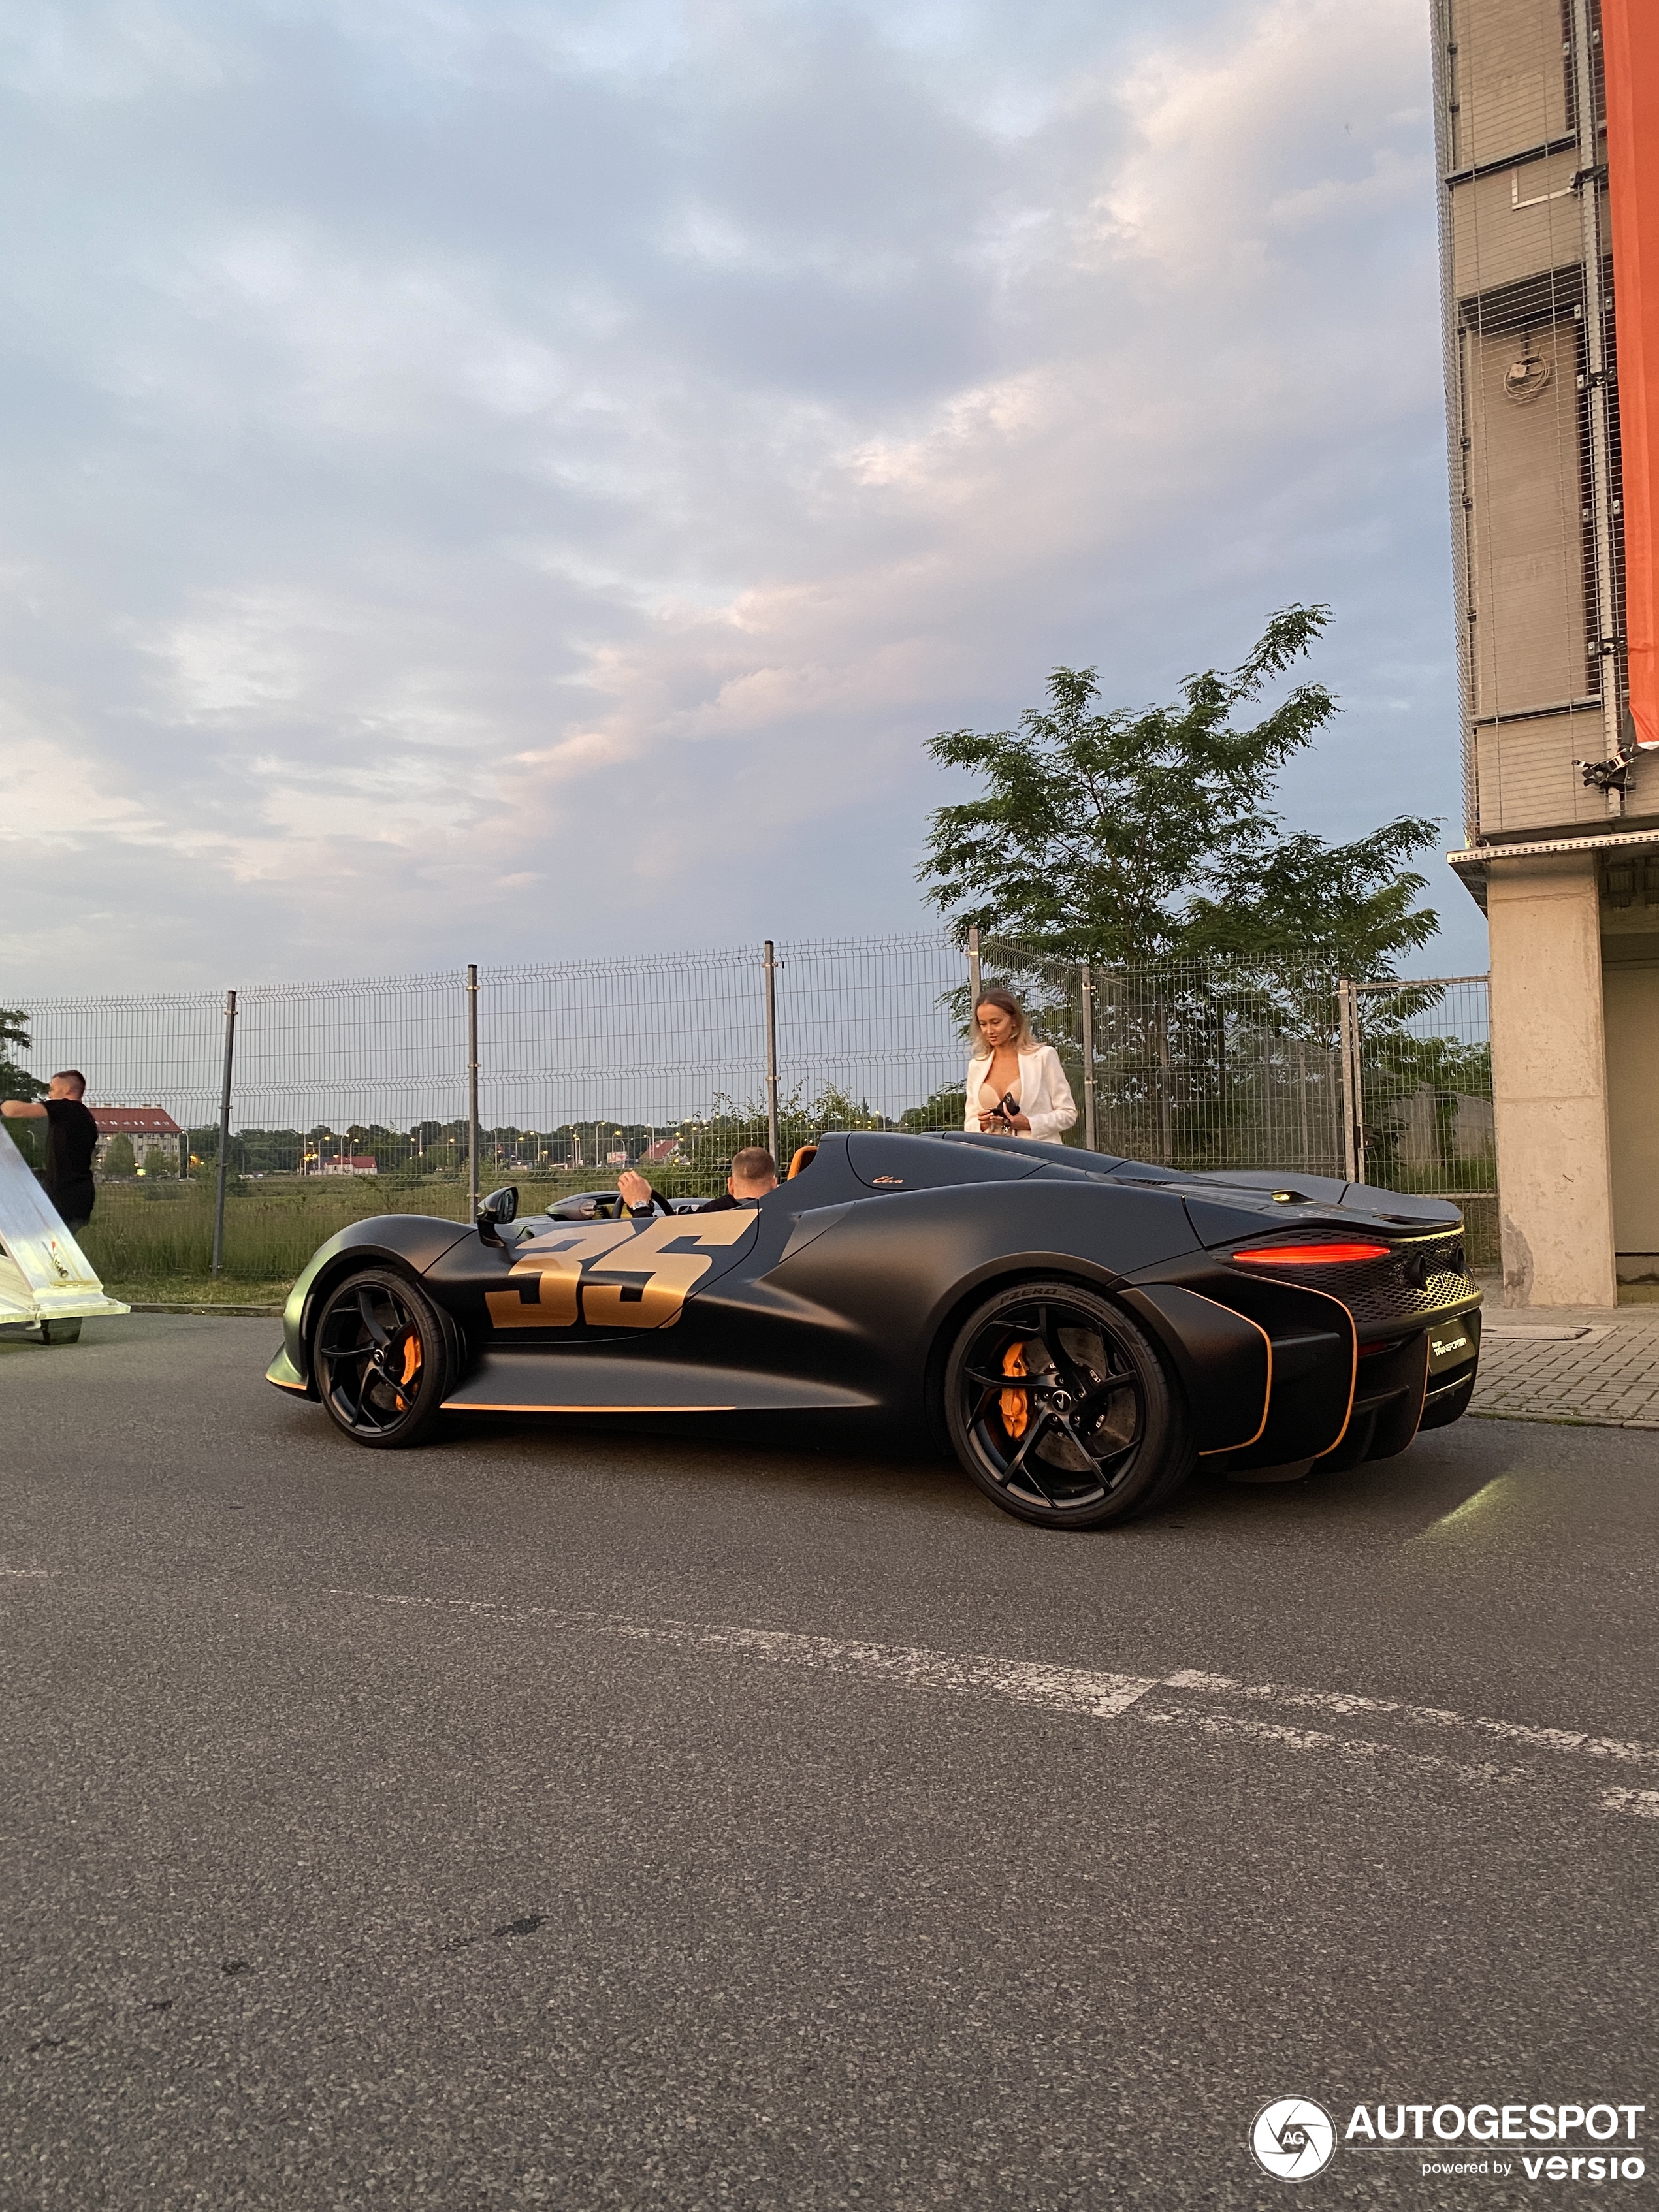 A new Elva spotted in Poland